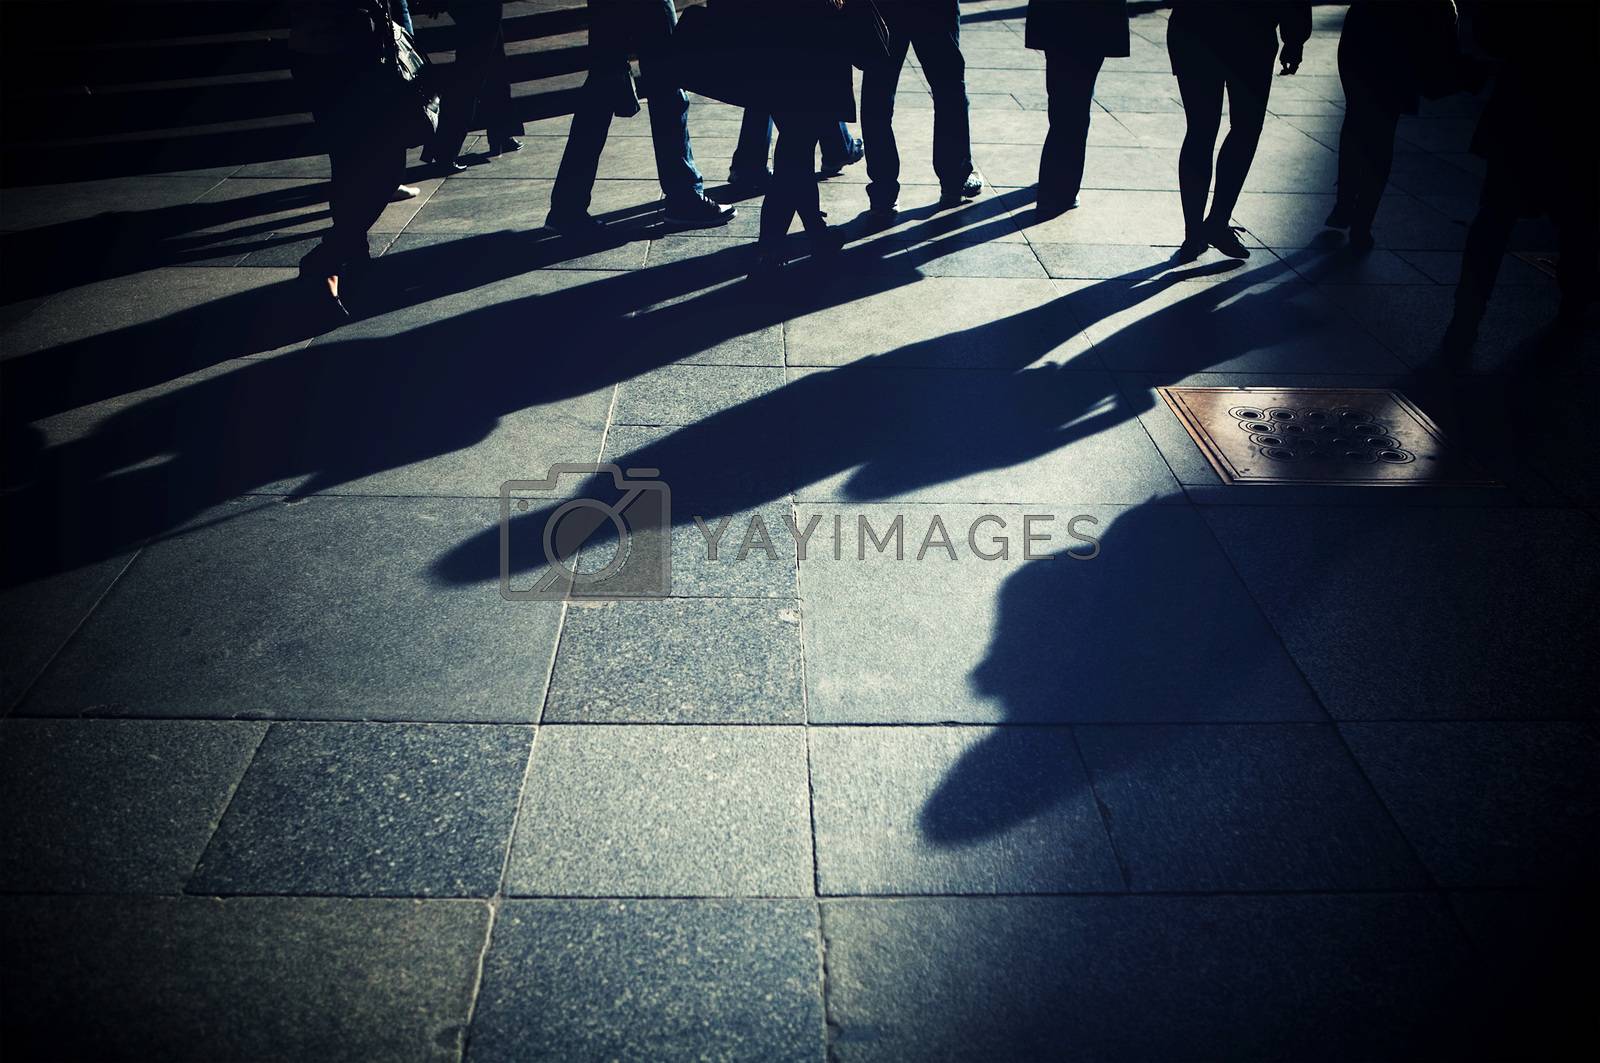 Shadows of people on the pavement. People walking the street.